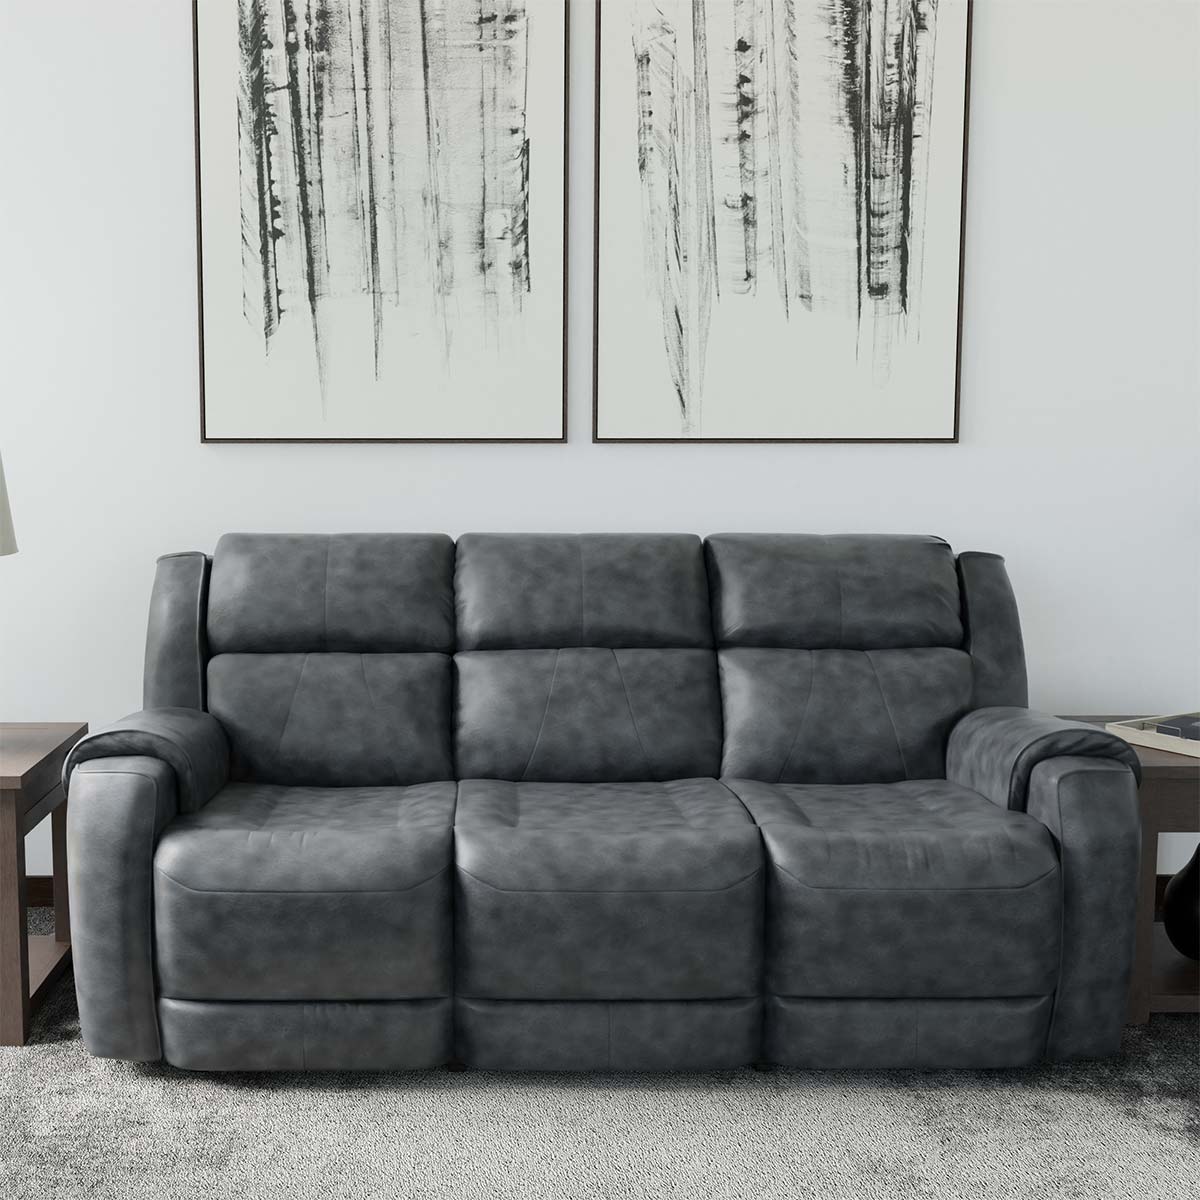 Southern Motion Valentino Slate Leather Power Reclining Sofa with Power Headrests